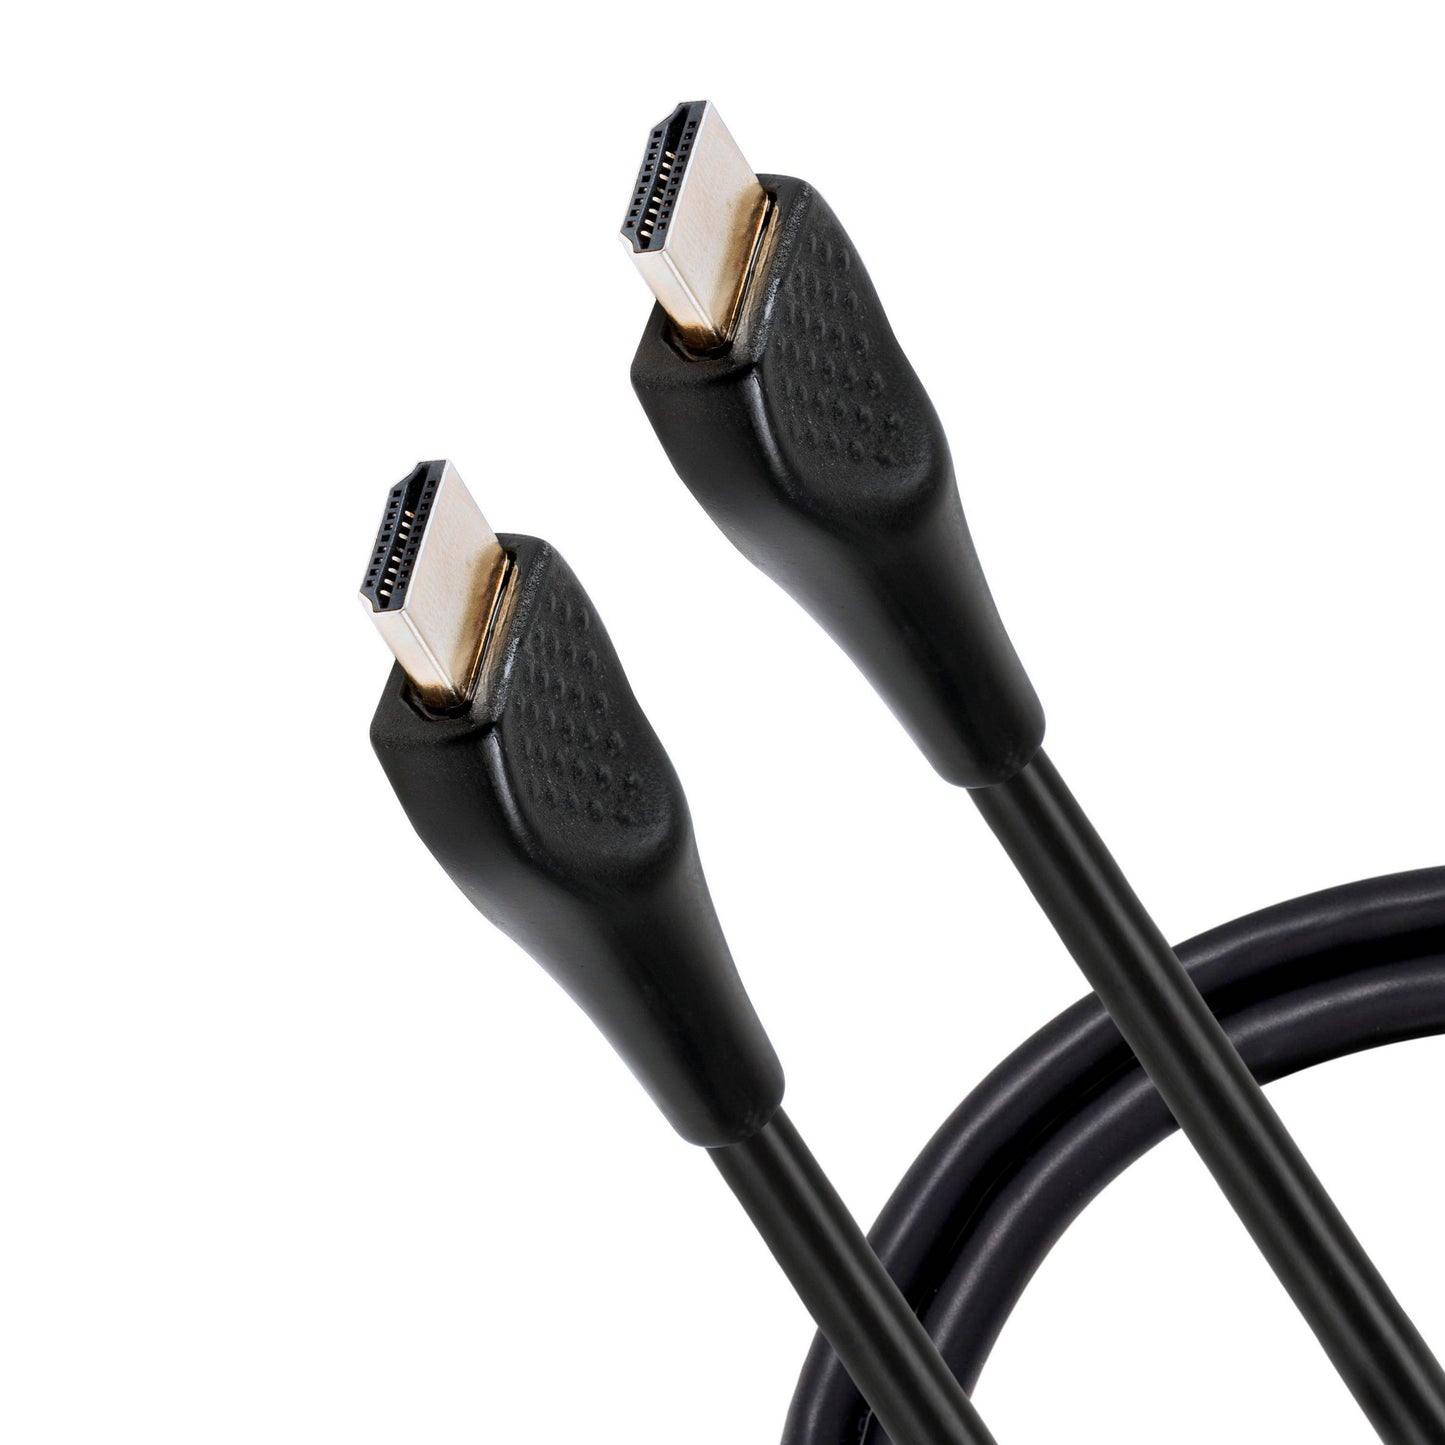 HDMI cable for watching 4K HD videos from PHILIPS, 4.57 meters